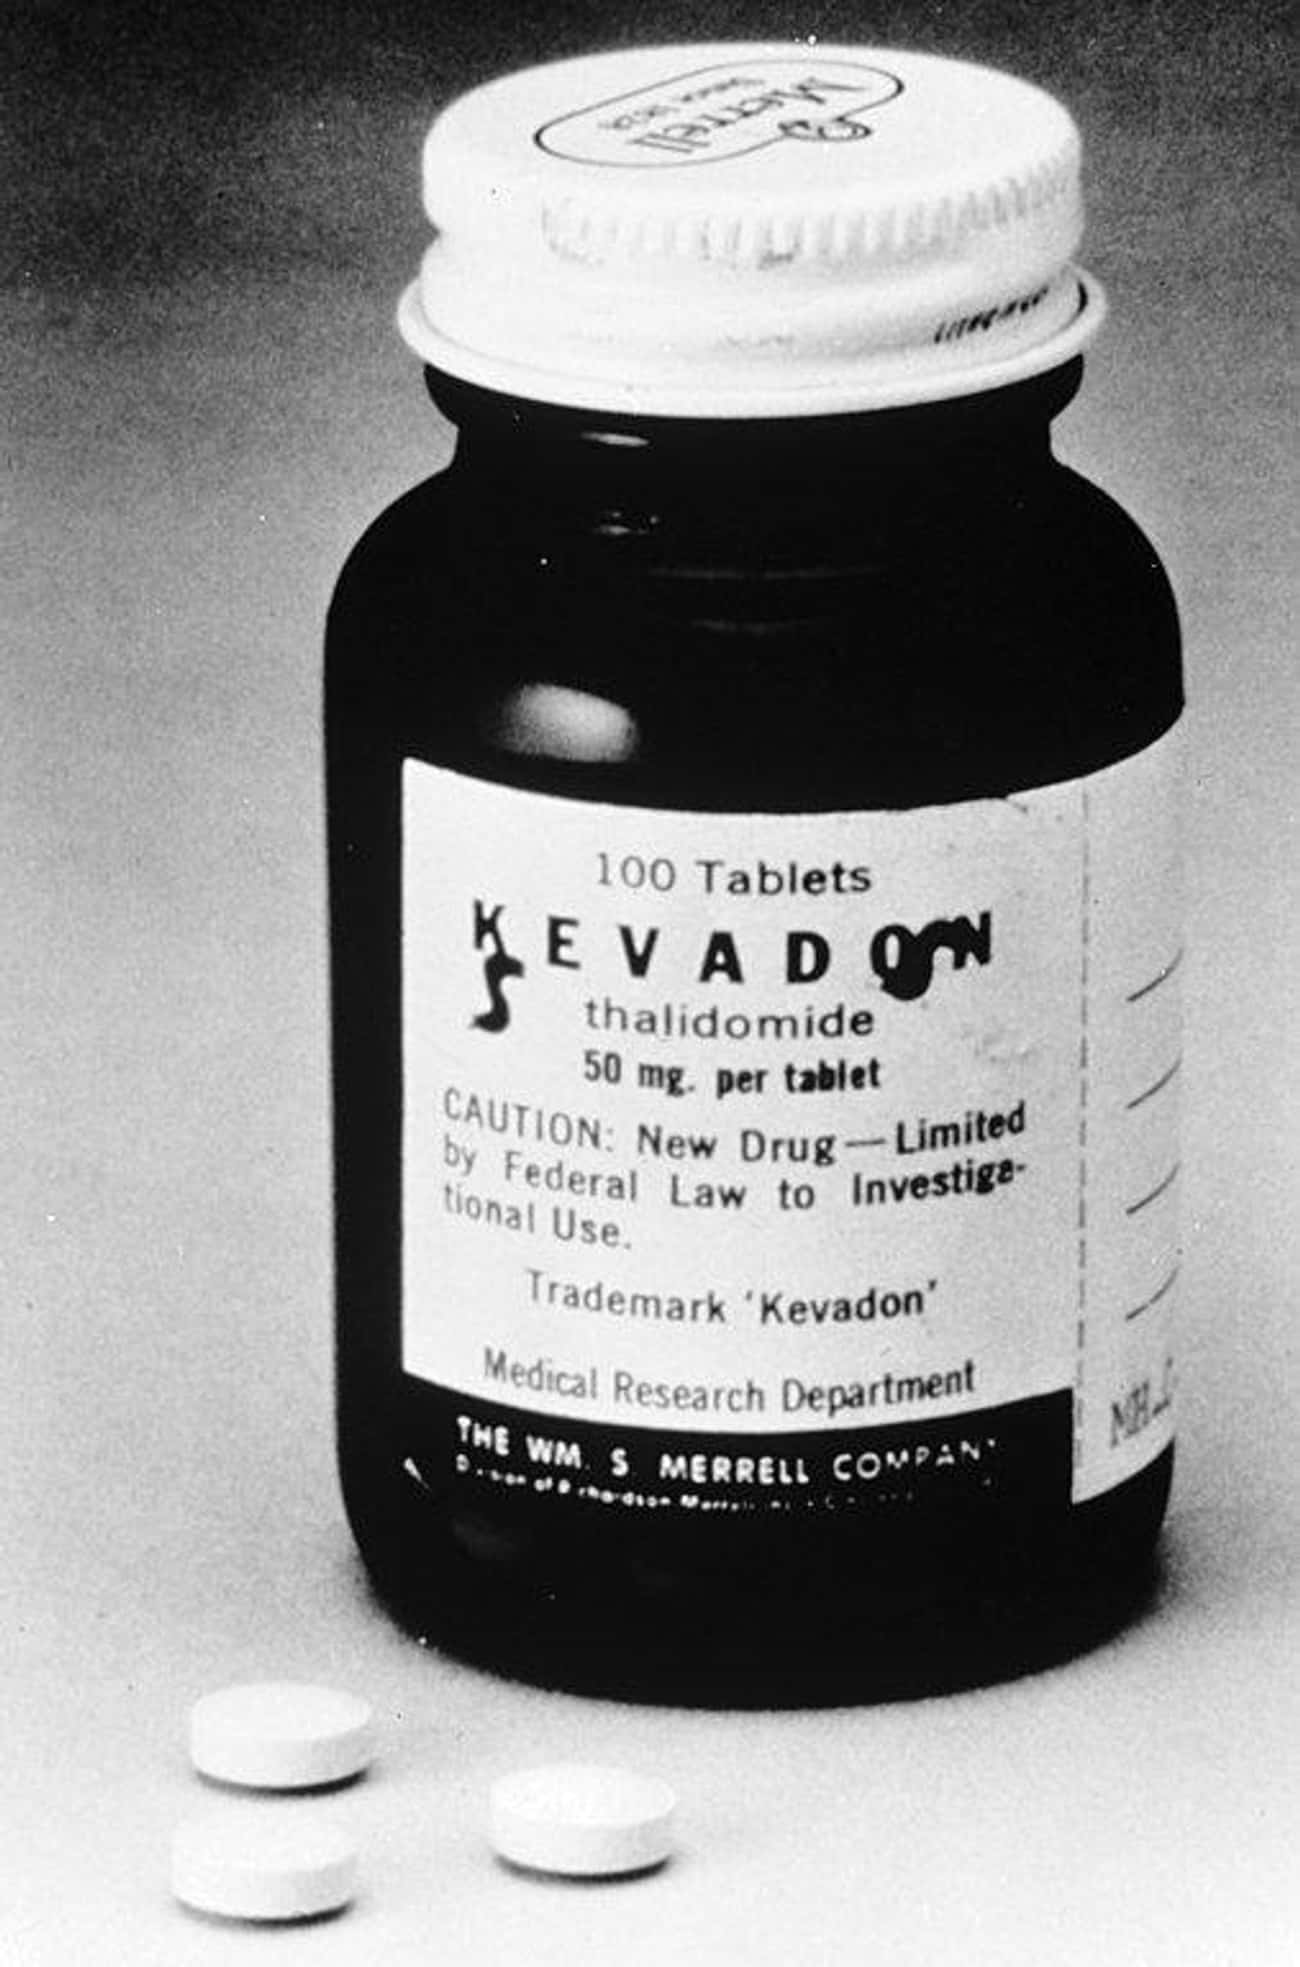 Thalidomide, A Drug Used For Morning Sickness, Caused Birth Defects